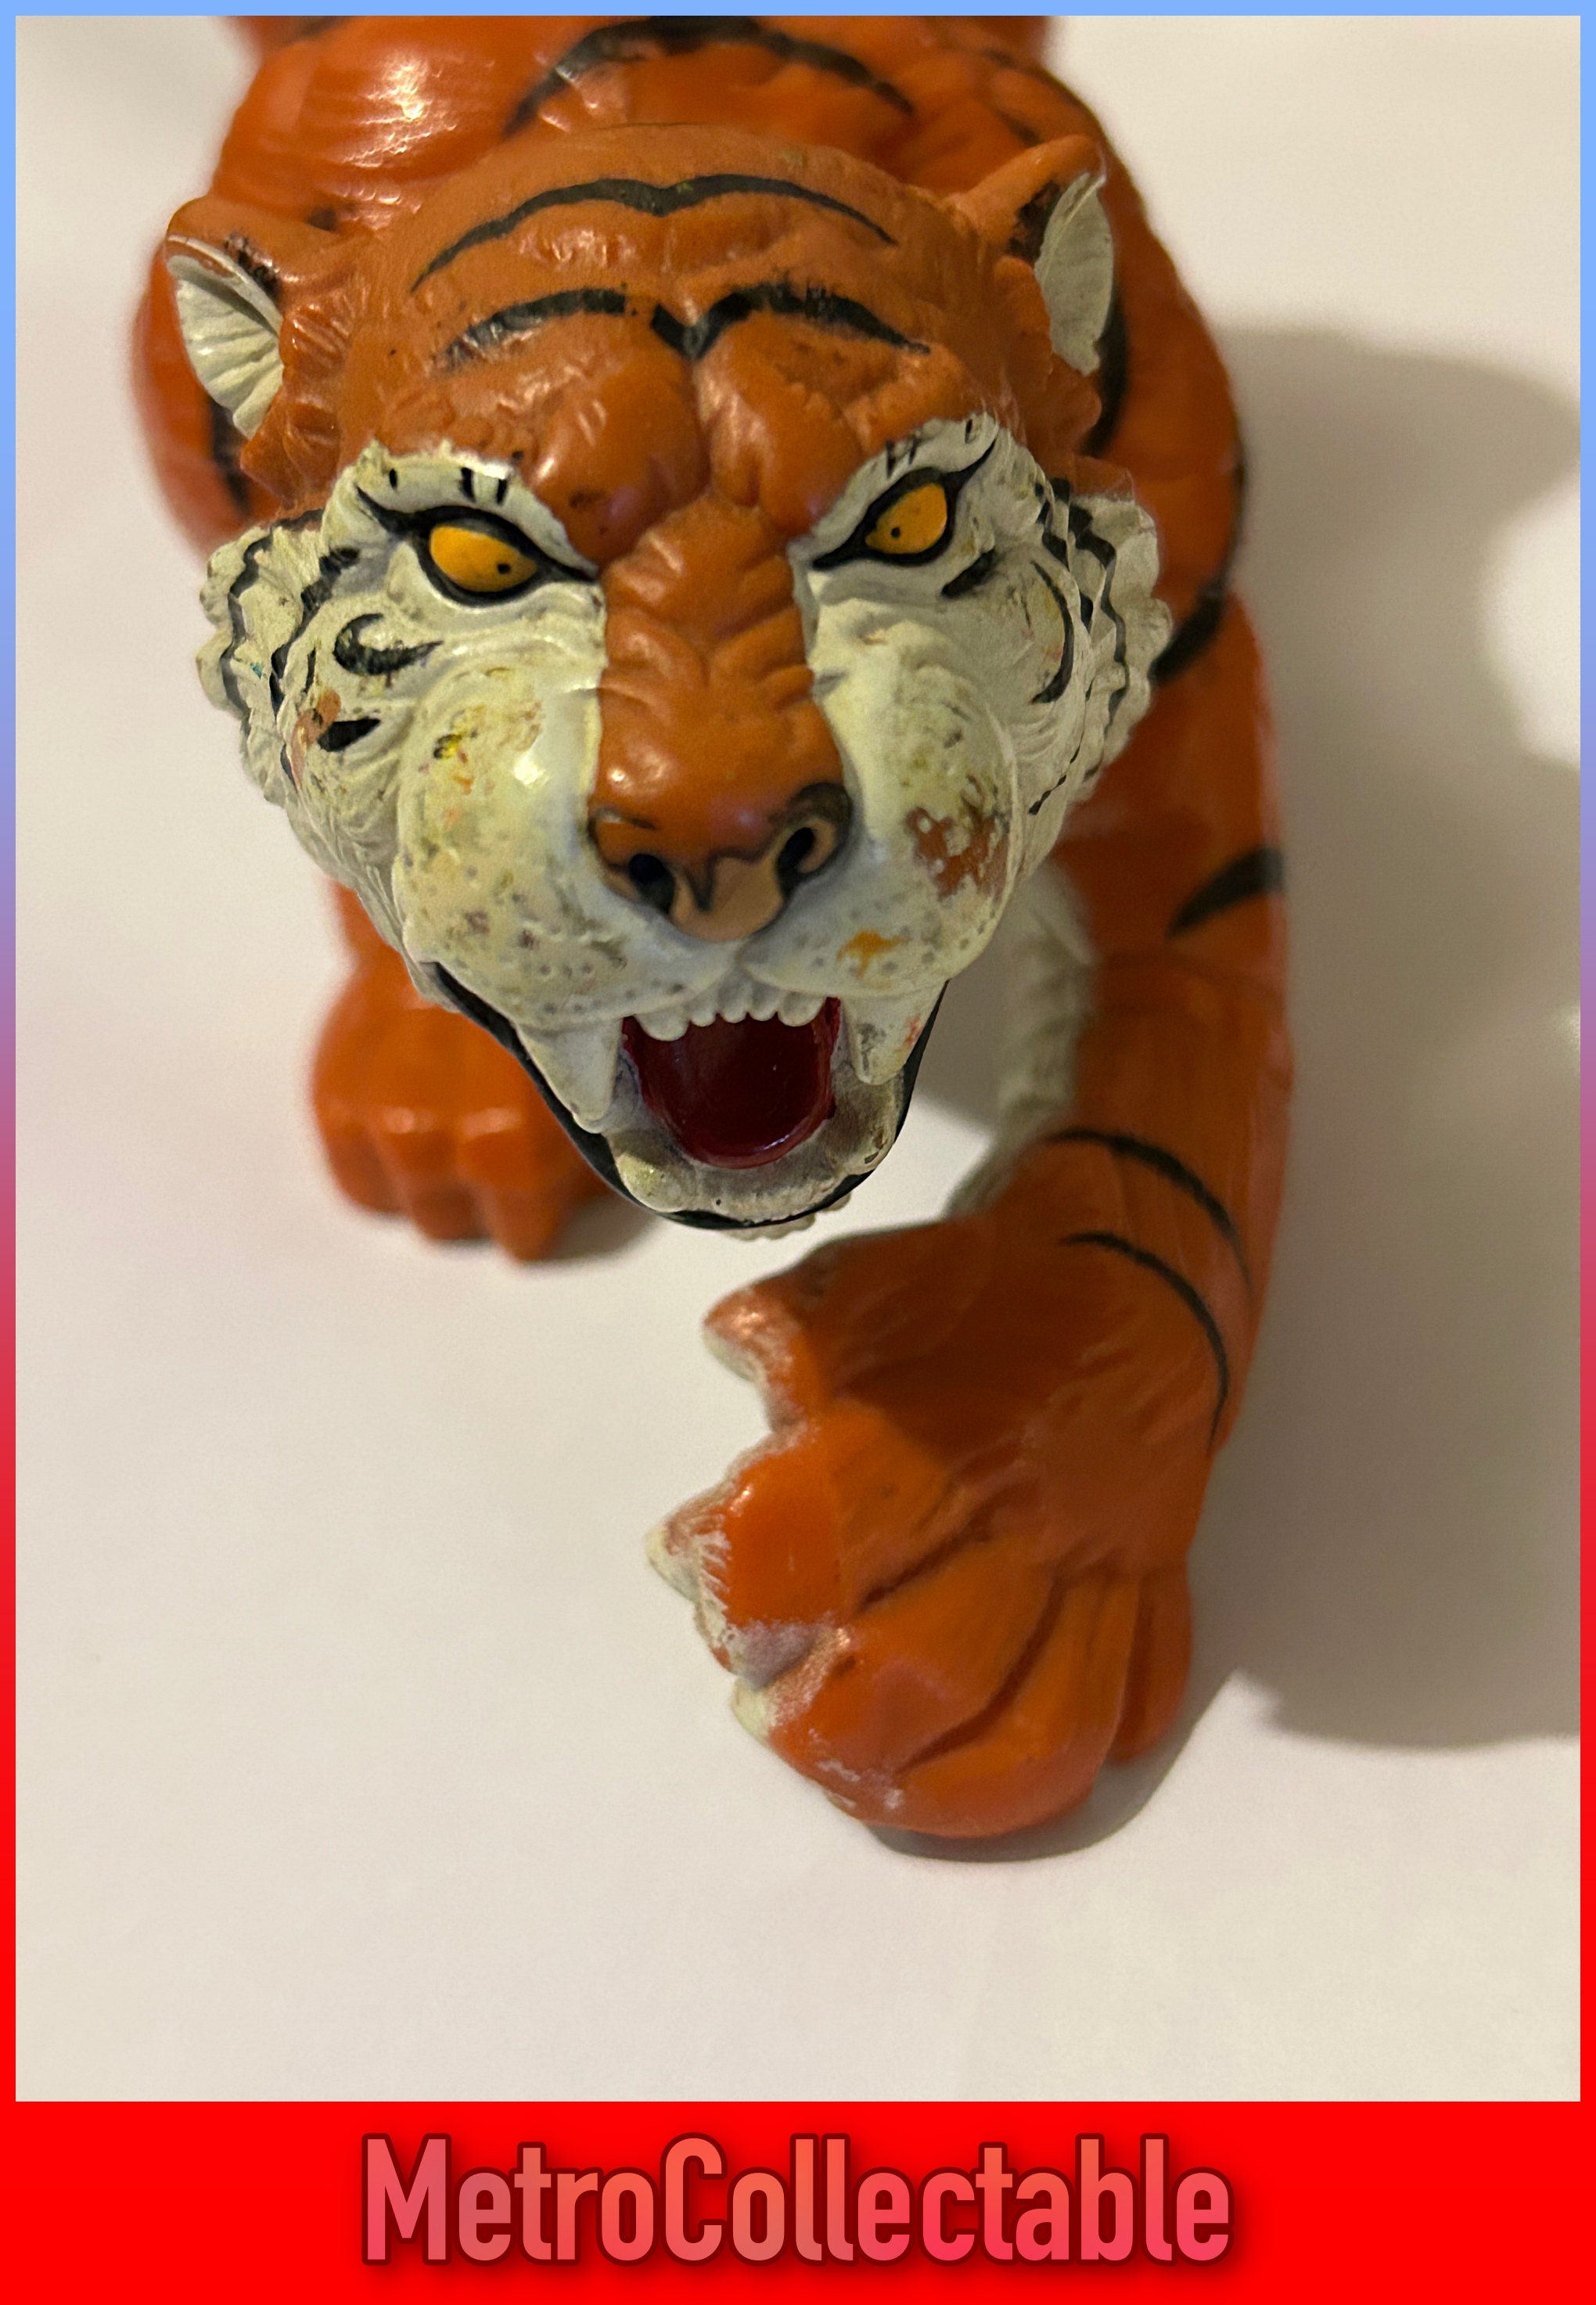 Papo -Hand-Painted - Figurine -Wild Animal Kingdom - Roaring Tiger -50182  -Collectible - for Children - Suitable for Boys and Girls- from 3 Years Old